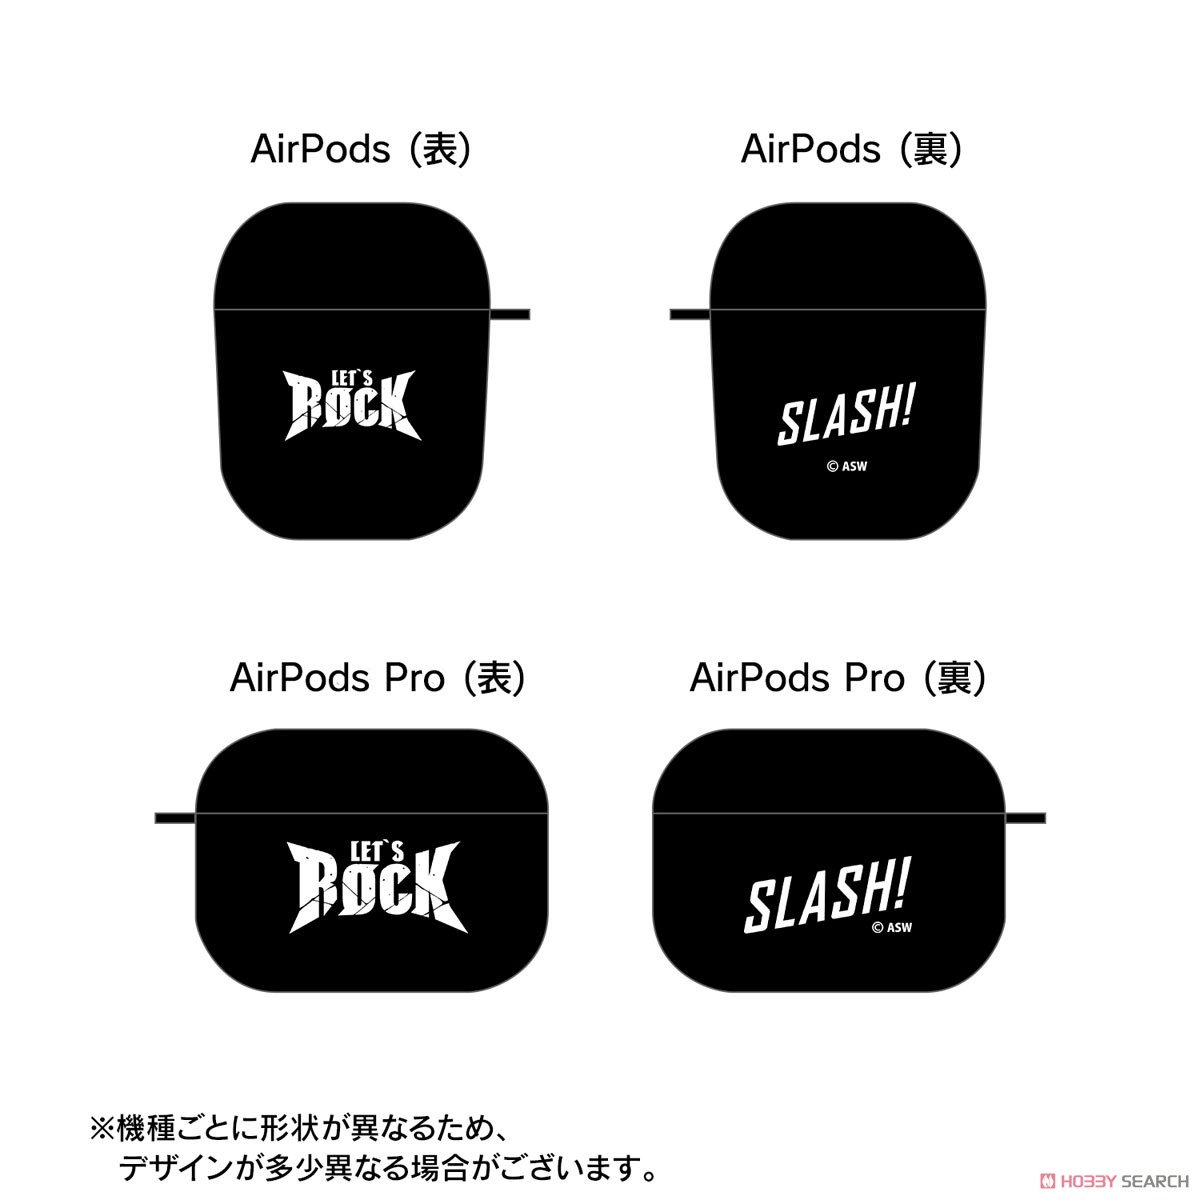 GUILTY GEAR -STRIVE- LET`S ROCK＆SLASH！ AirPodsケース(対応機種/AirPods Pro) (キャラクターグッズ) その他の画像3